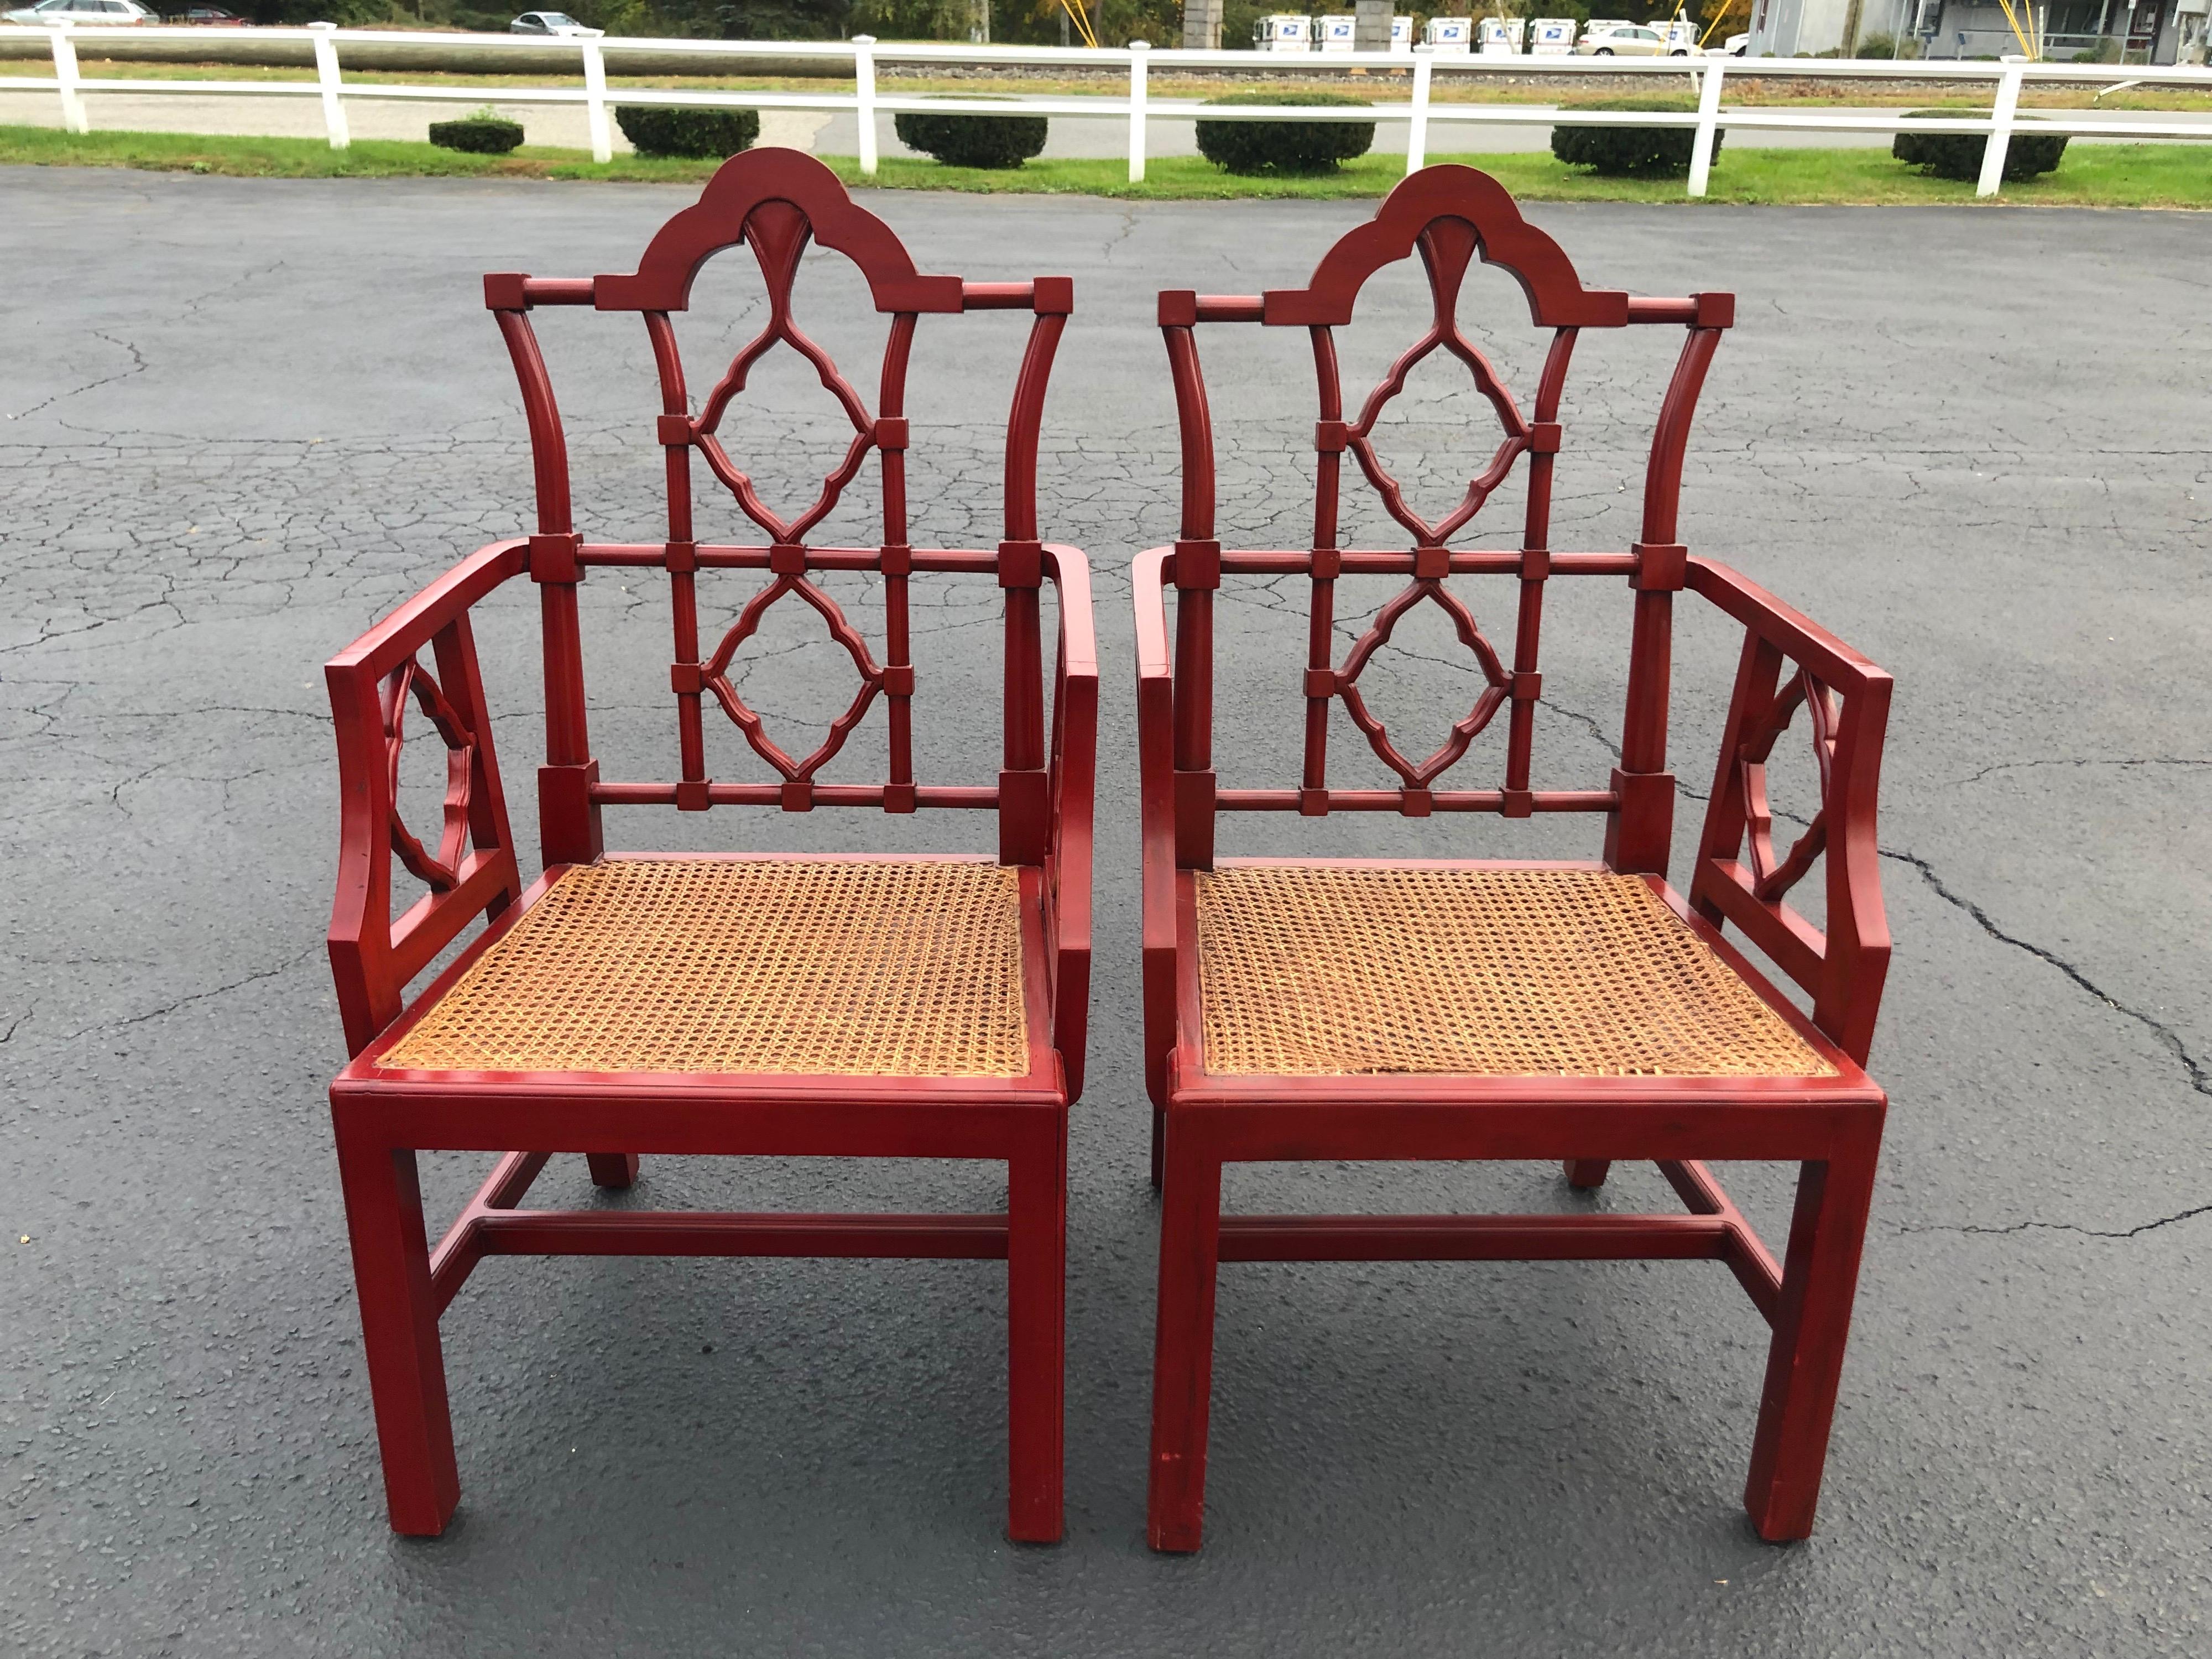 Chinese Chippendale Faux bamboo chairs in red. Nice large chair. Comfortable for a larger person. Perfect for the head ends of a table. Deep Pagoda red tone. Caned seats with custom cushions. One seats caning is lifting on one end . Asian throw